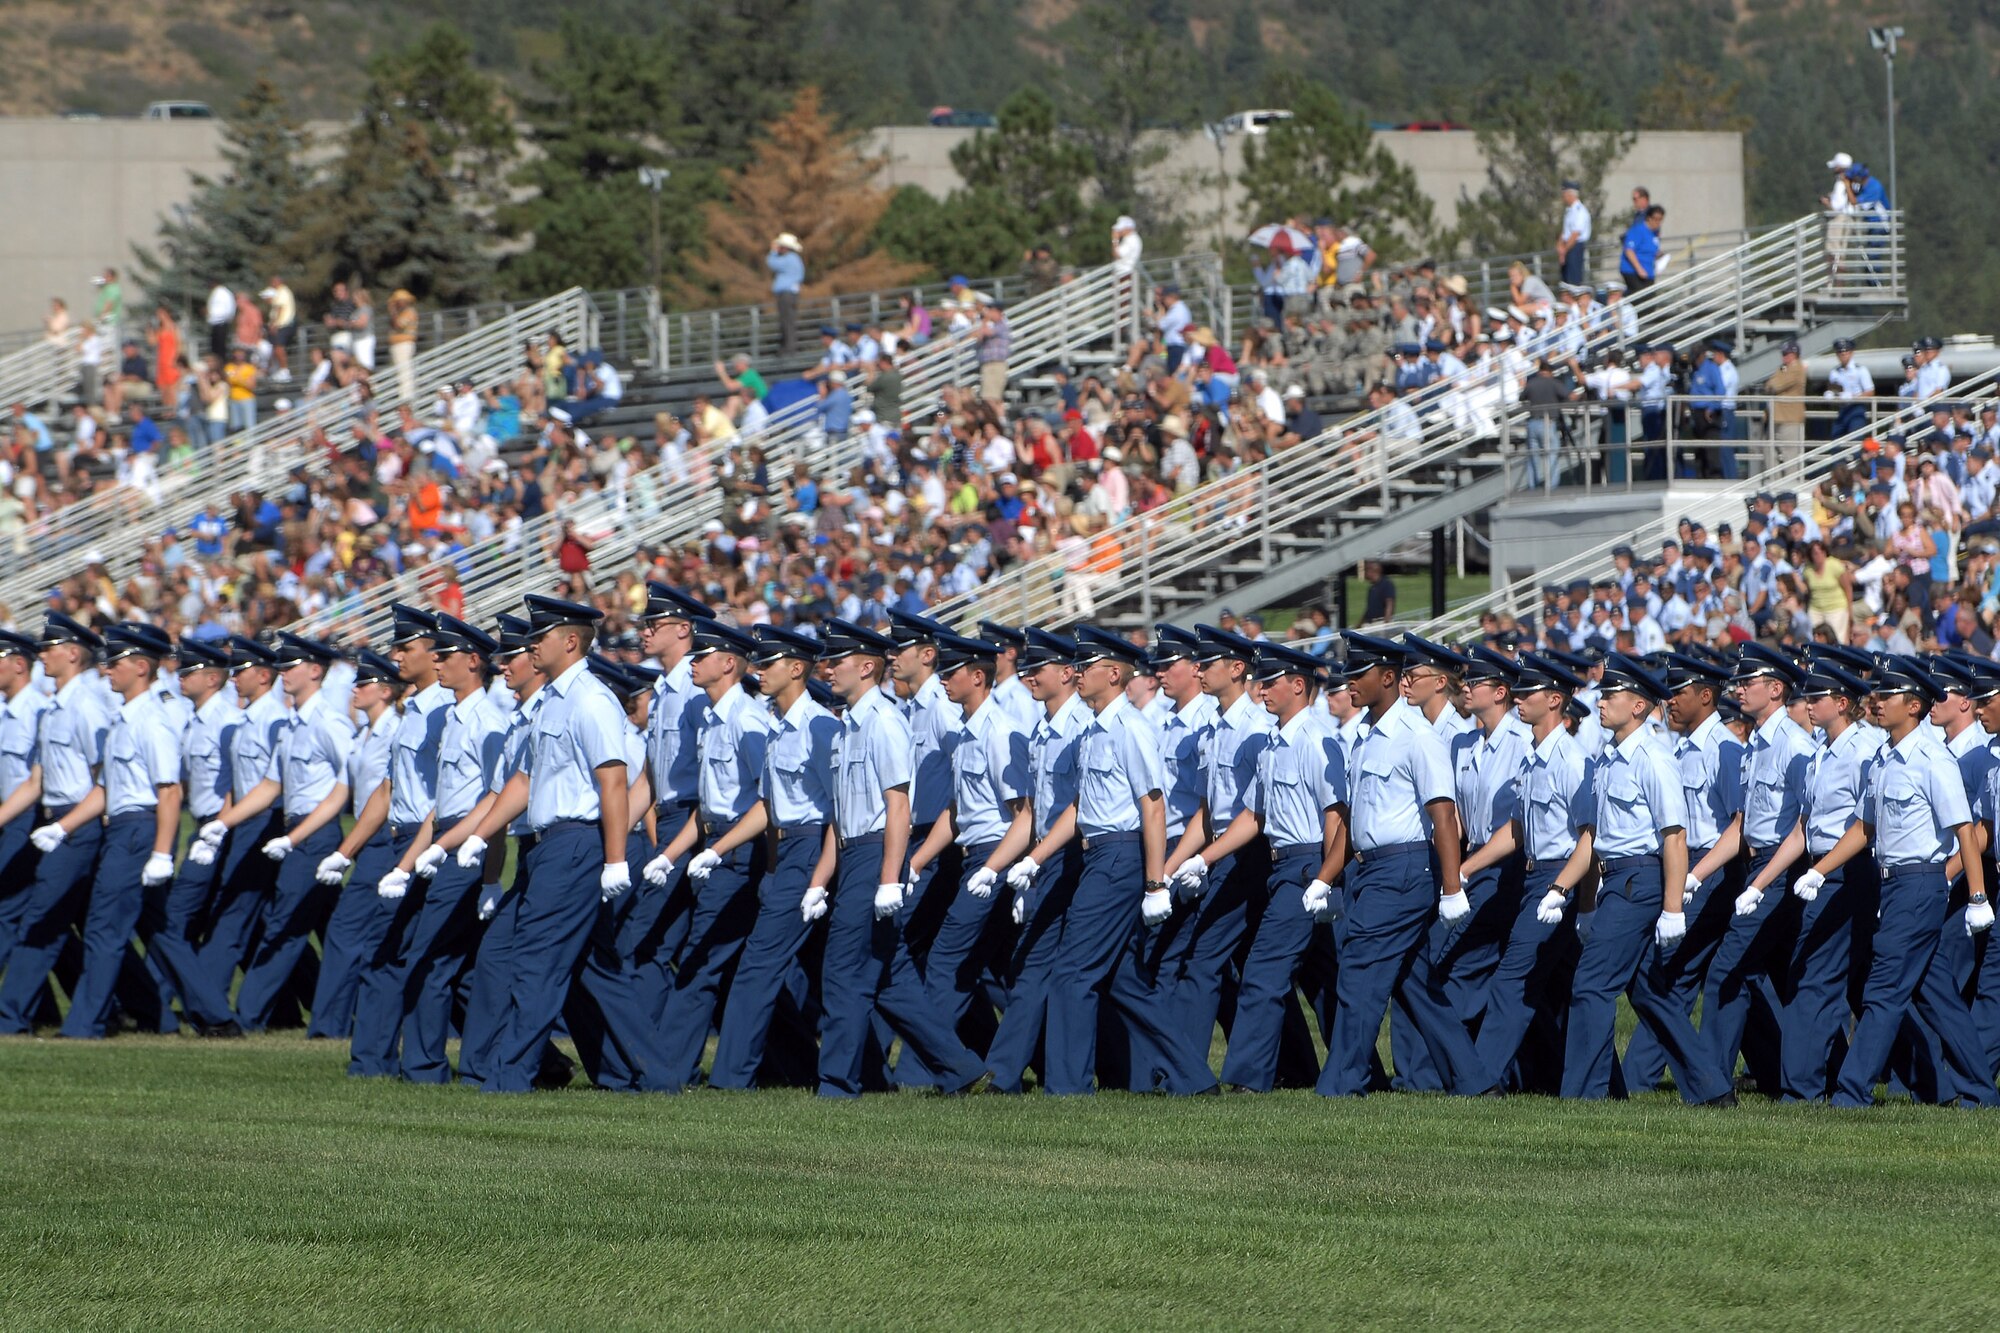 U.S. Air Force Academy basic cadets file into position Aug 6 for Acceptance Day ceremonies at the Stillman Parade Field near Colorado Springs, Colo. (U.S Air Force photo/David Armer)